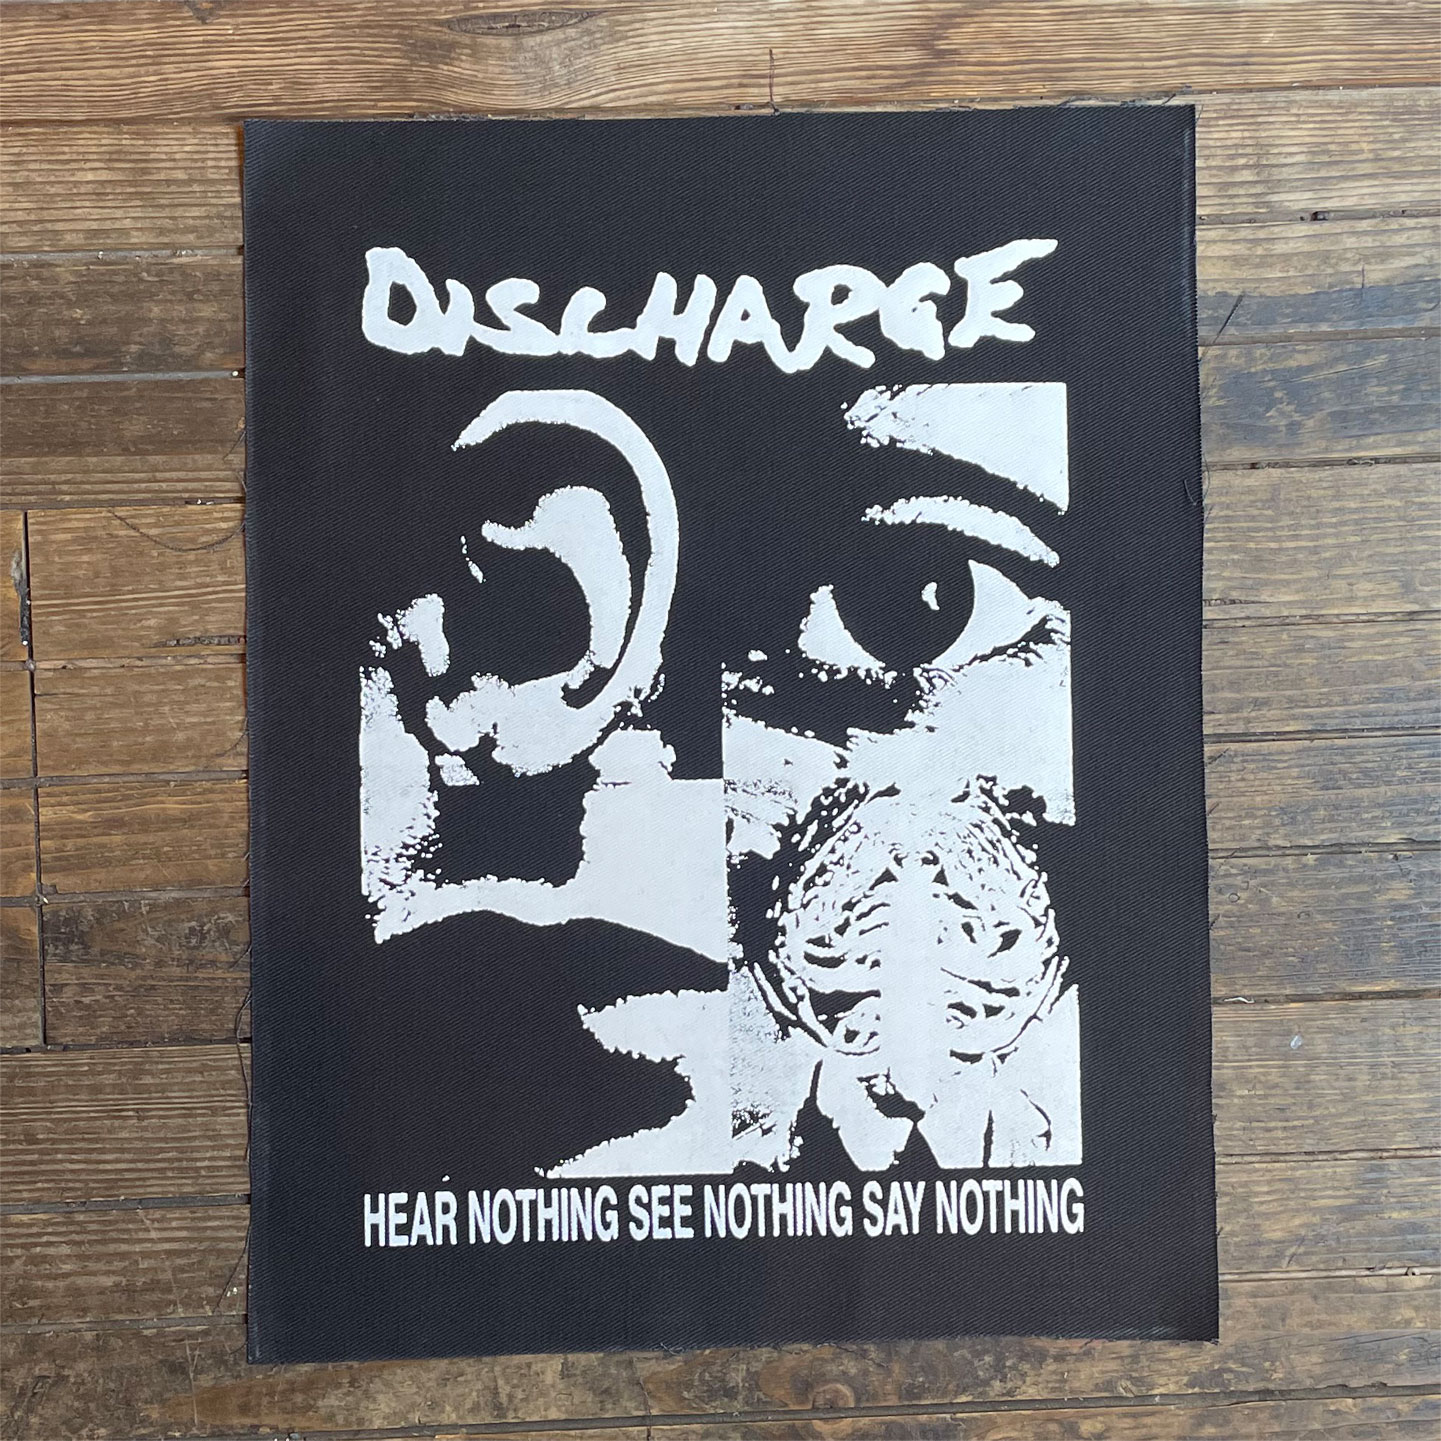 DISCHARGE BACKPATCH HEAR NOTHING SEE NOTHING SAY NOTHING